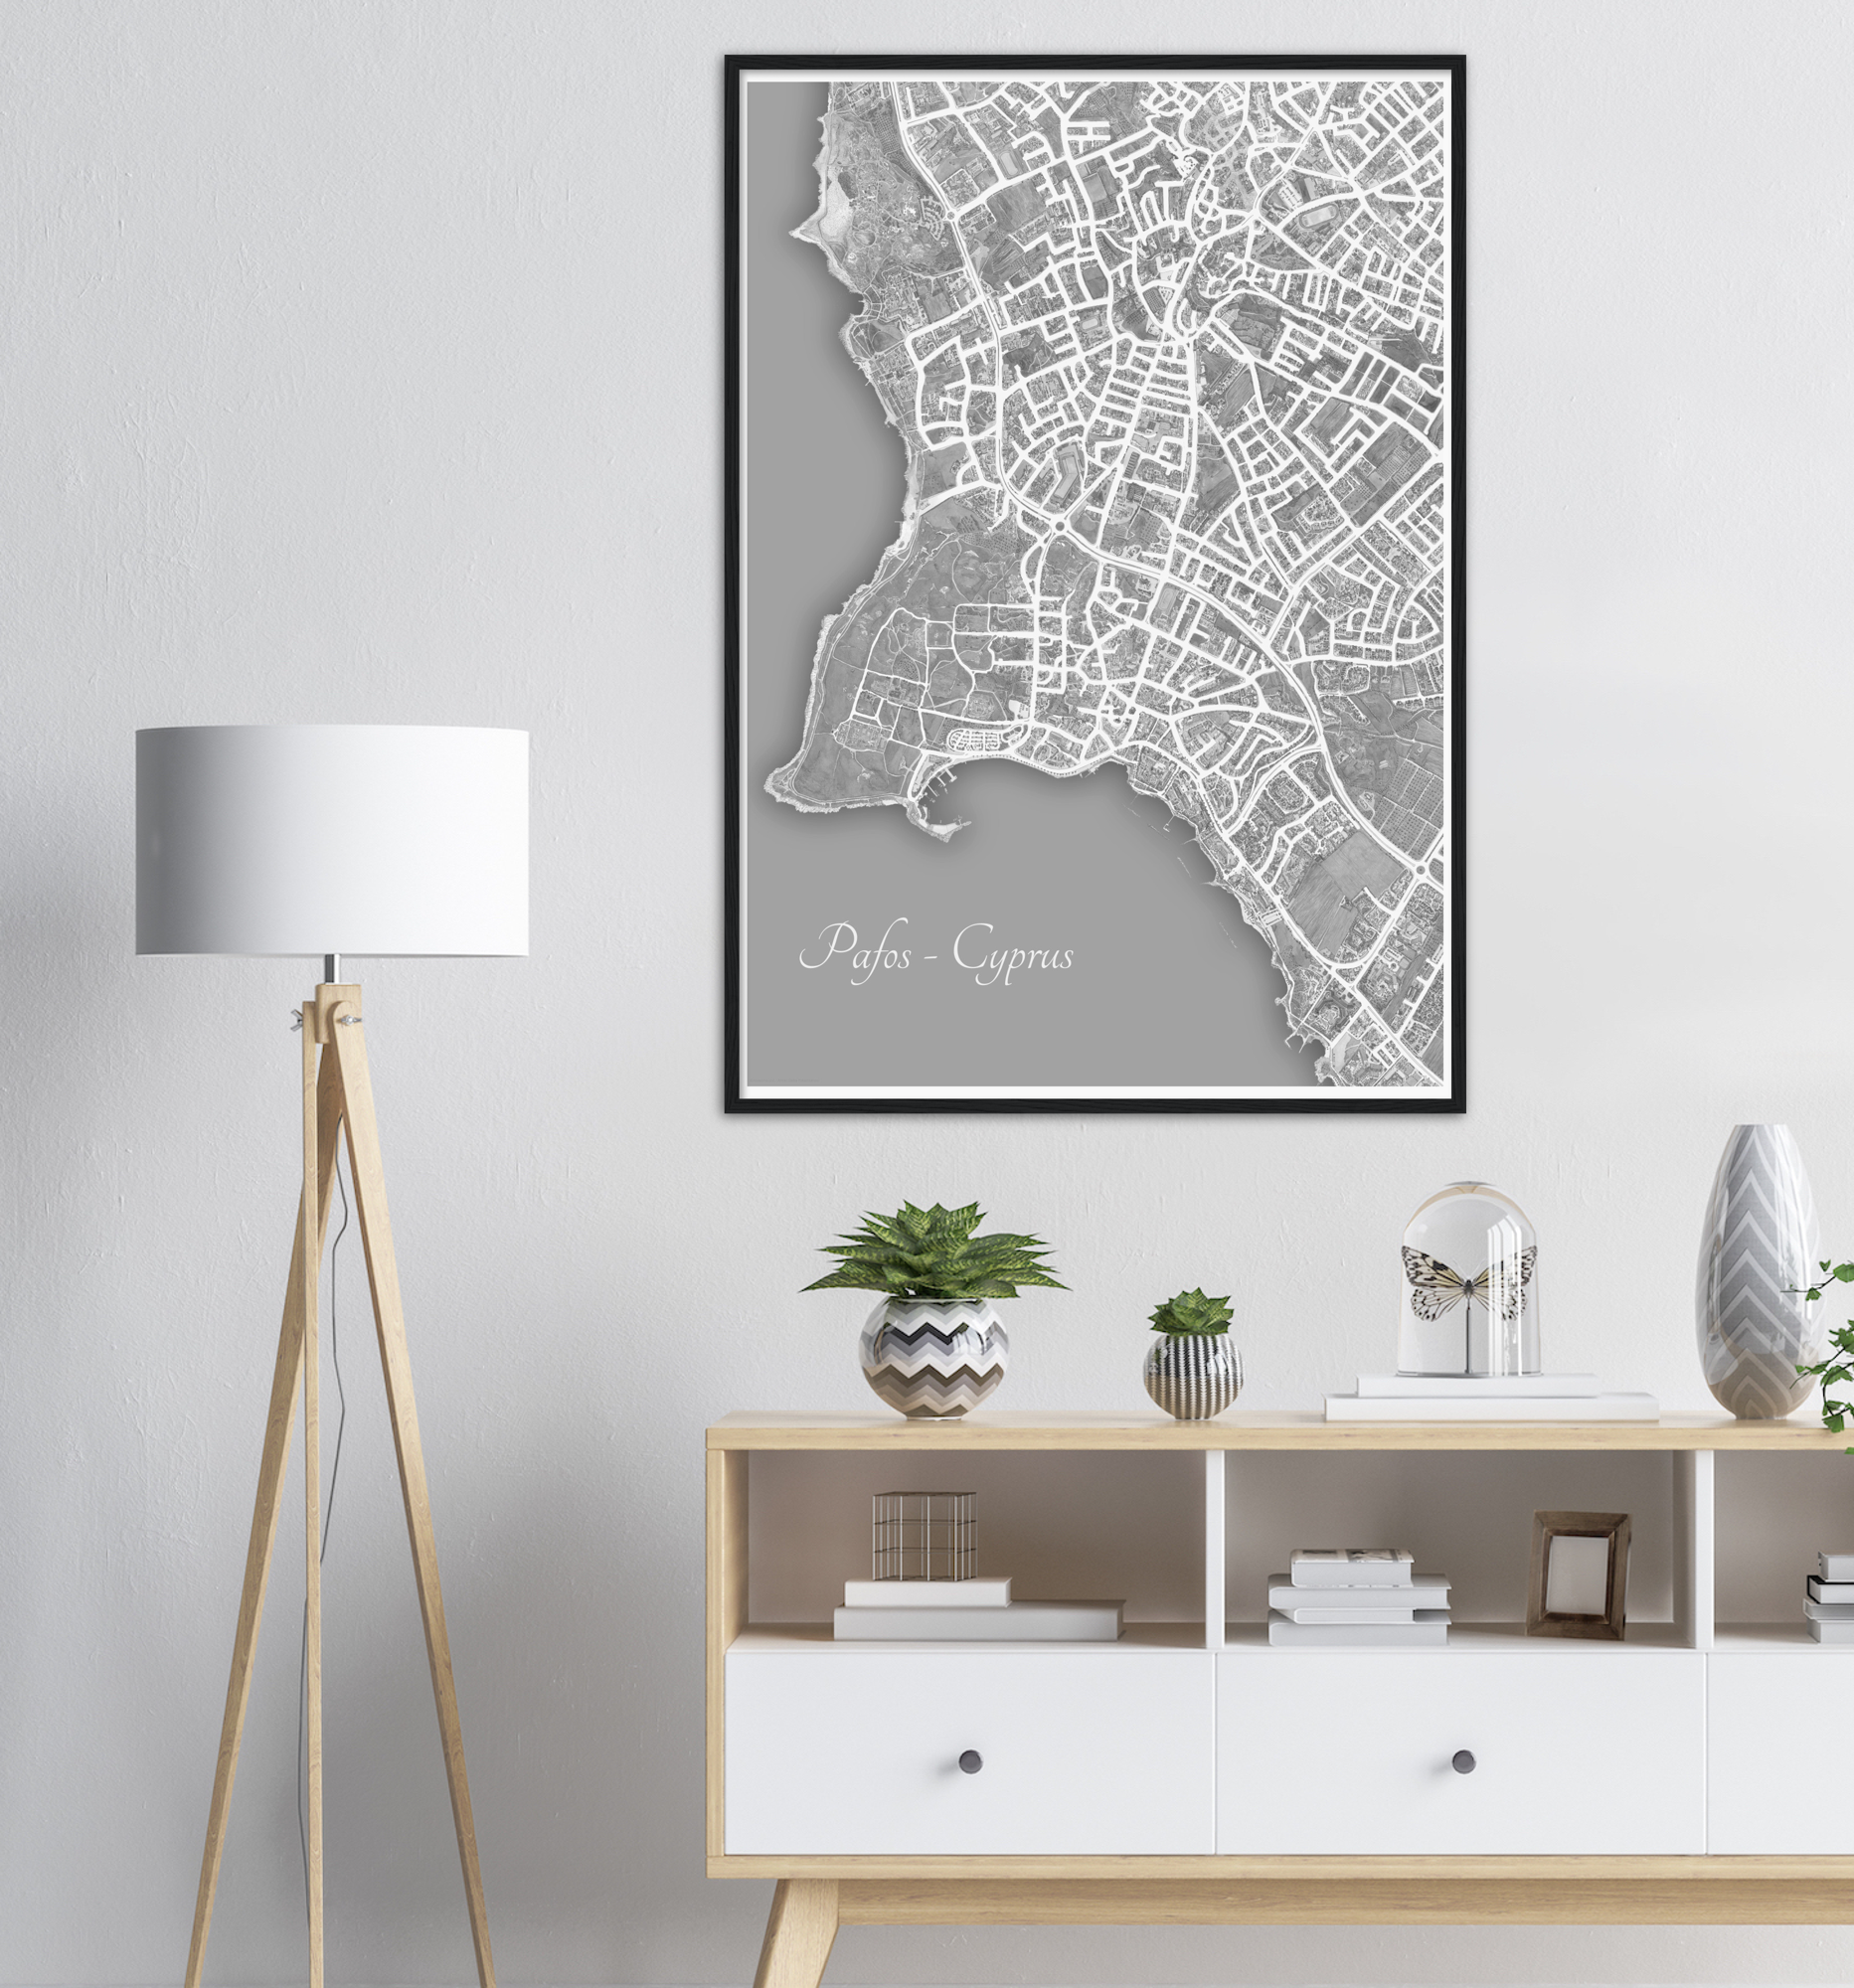 Pafos, Cyprus – Black & White Print – Wooden Framed Poster